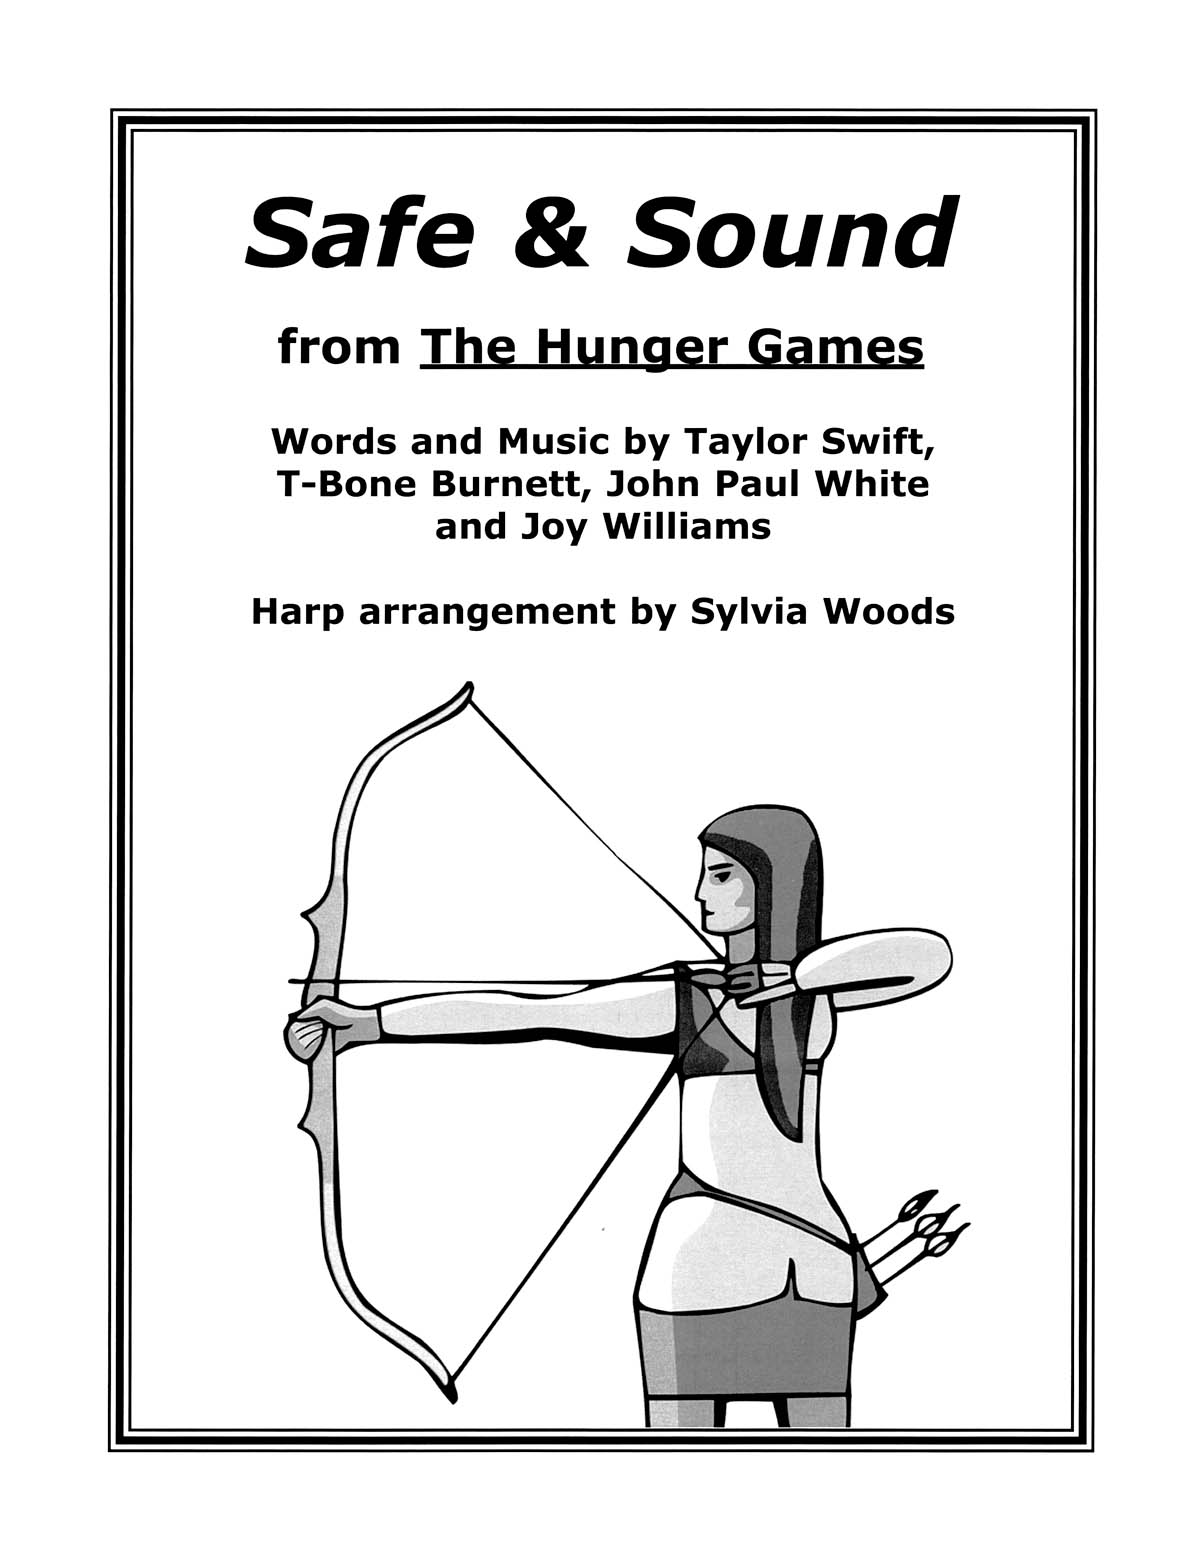 Safe & Sound from The Hunger Games(Arranged fuer Harp)